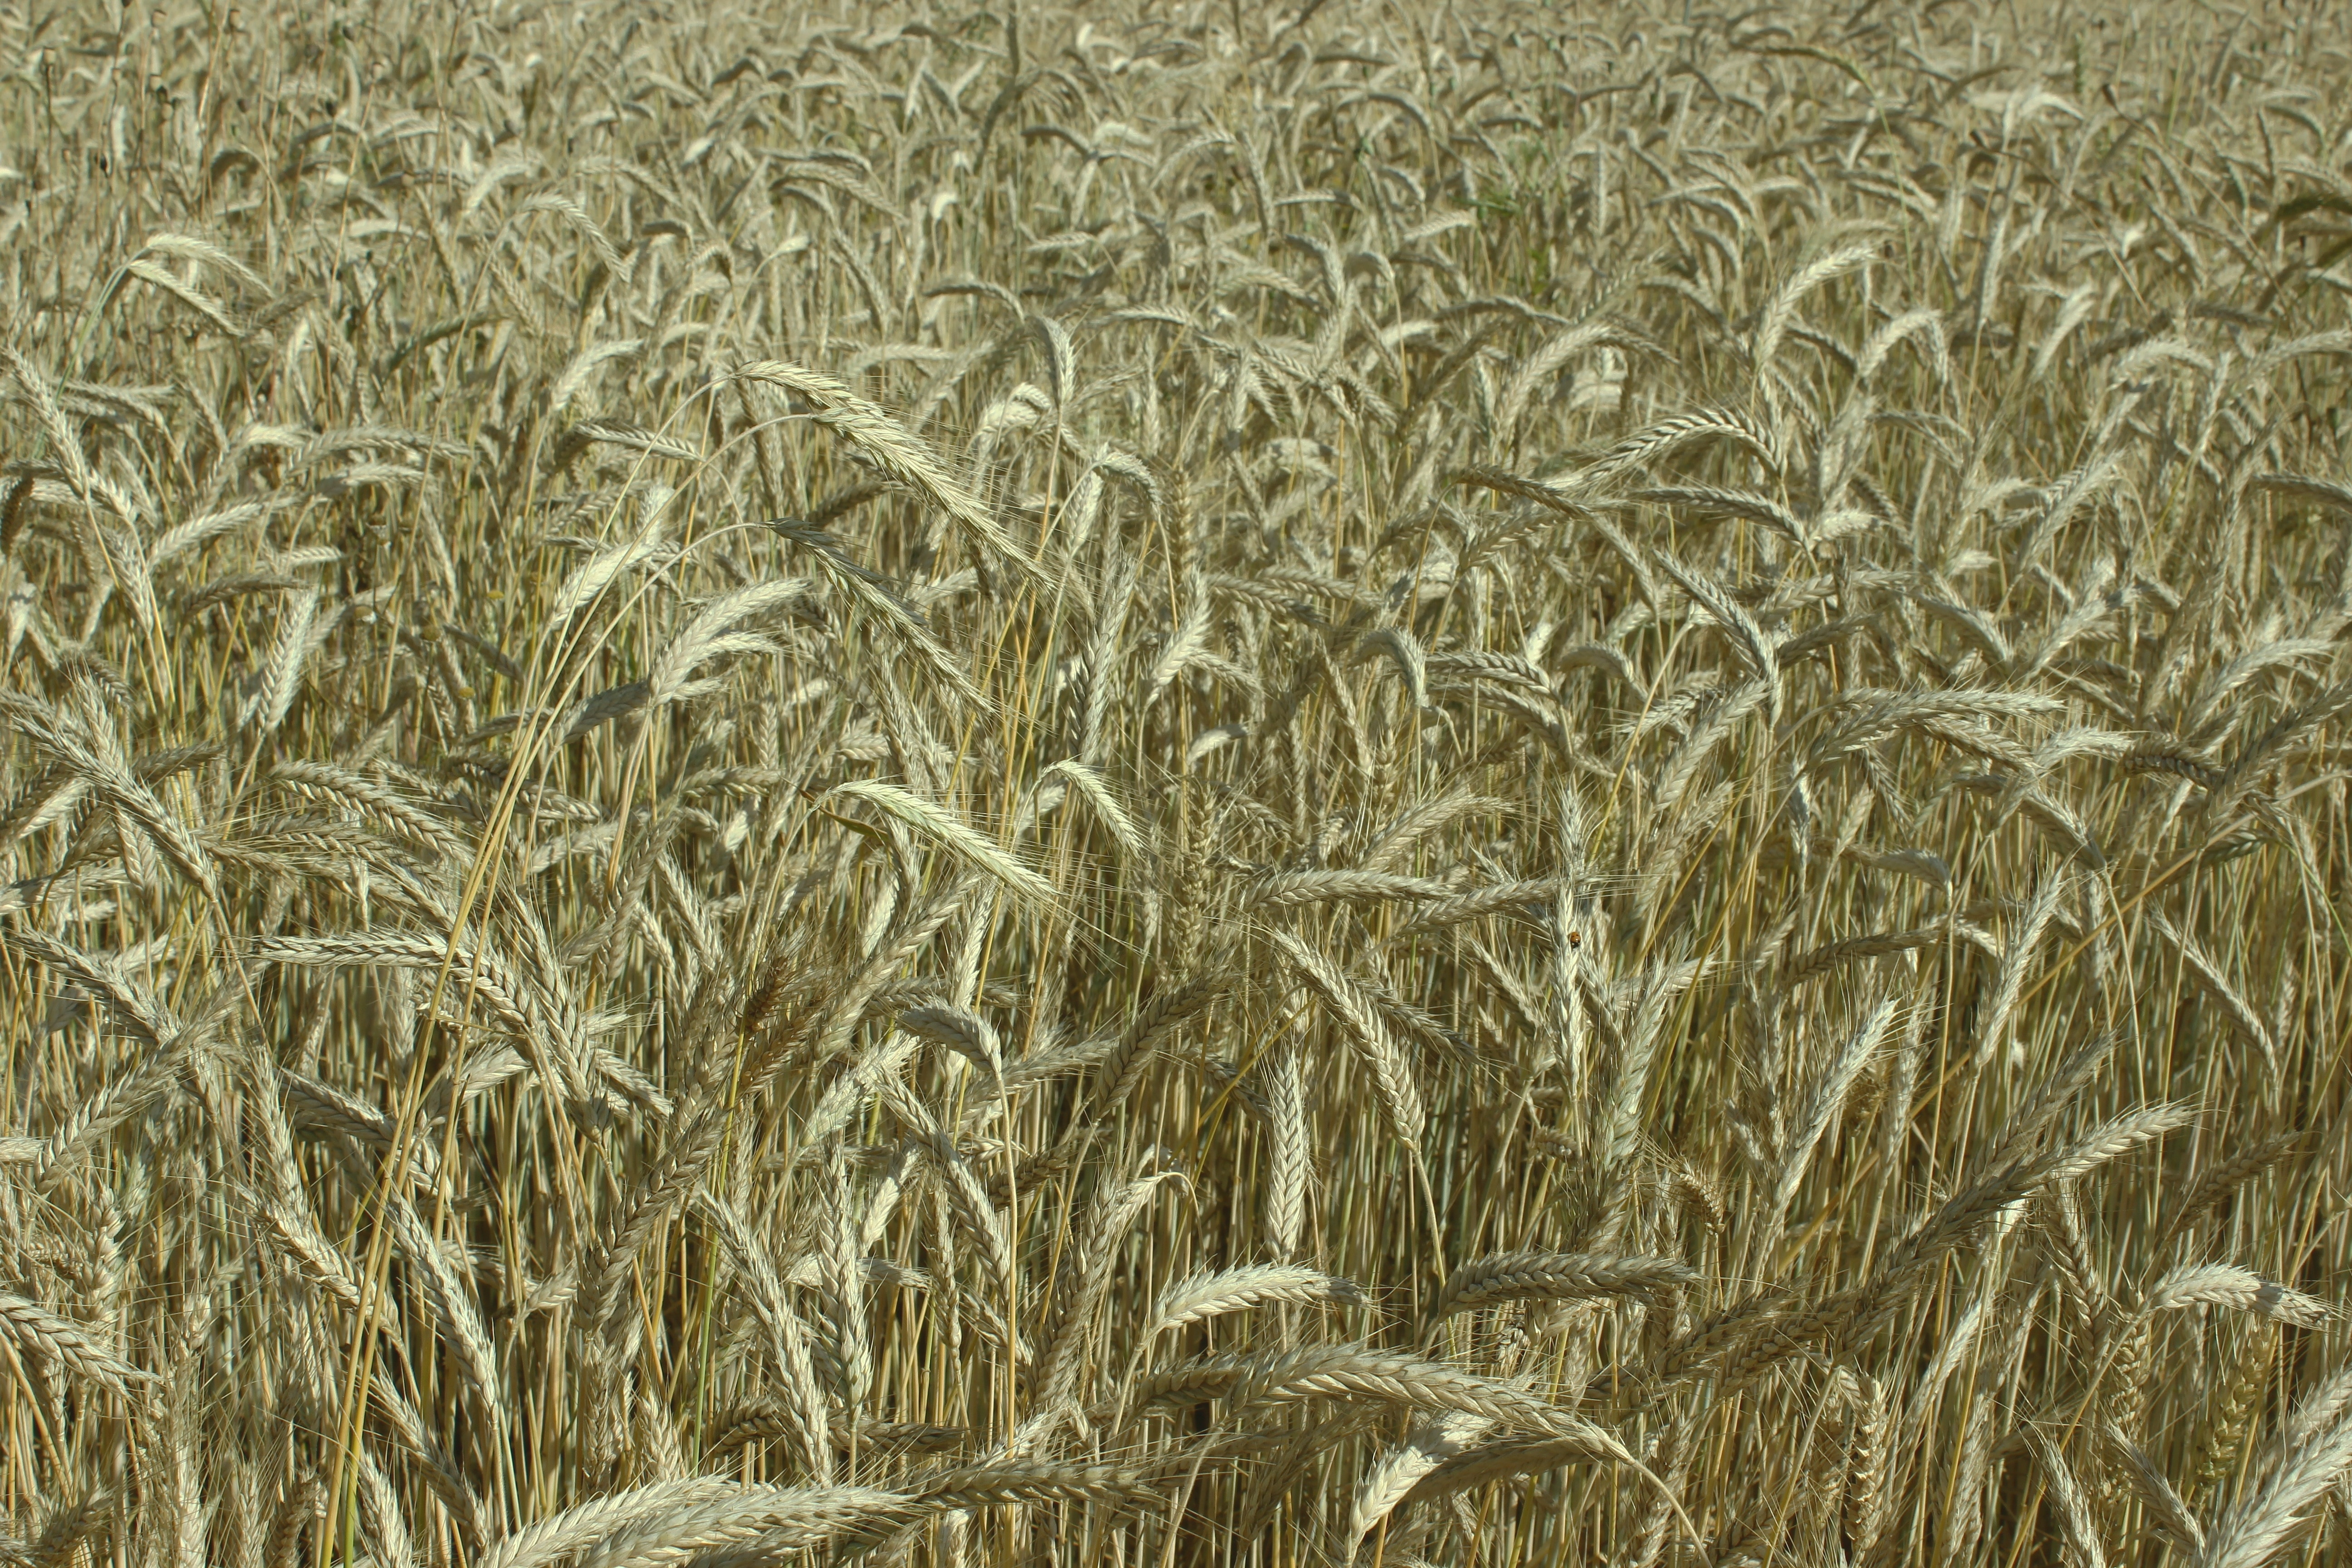 Spike, Wheat Field, Cereals, Yellow, agriculture, cereal plant